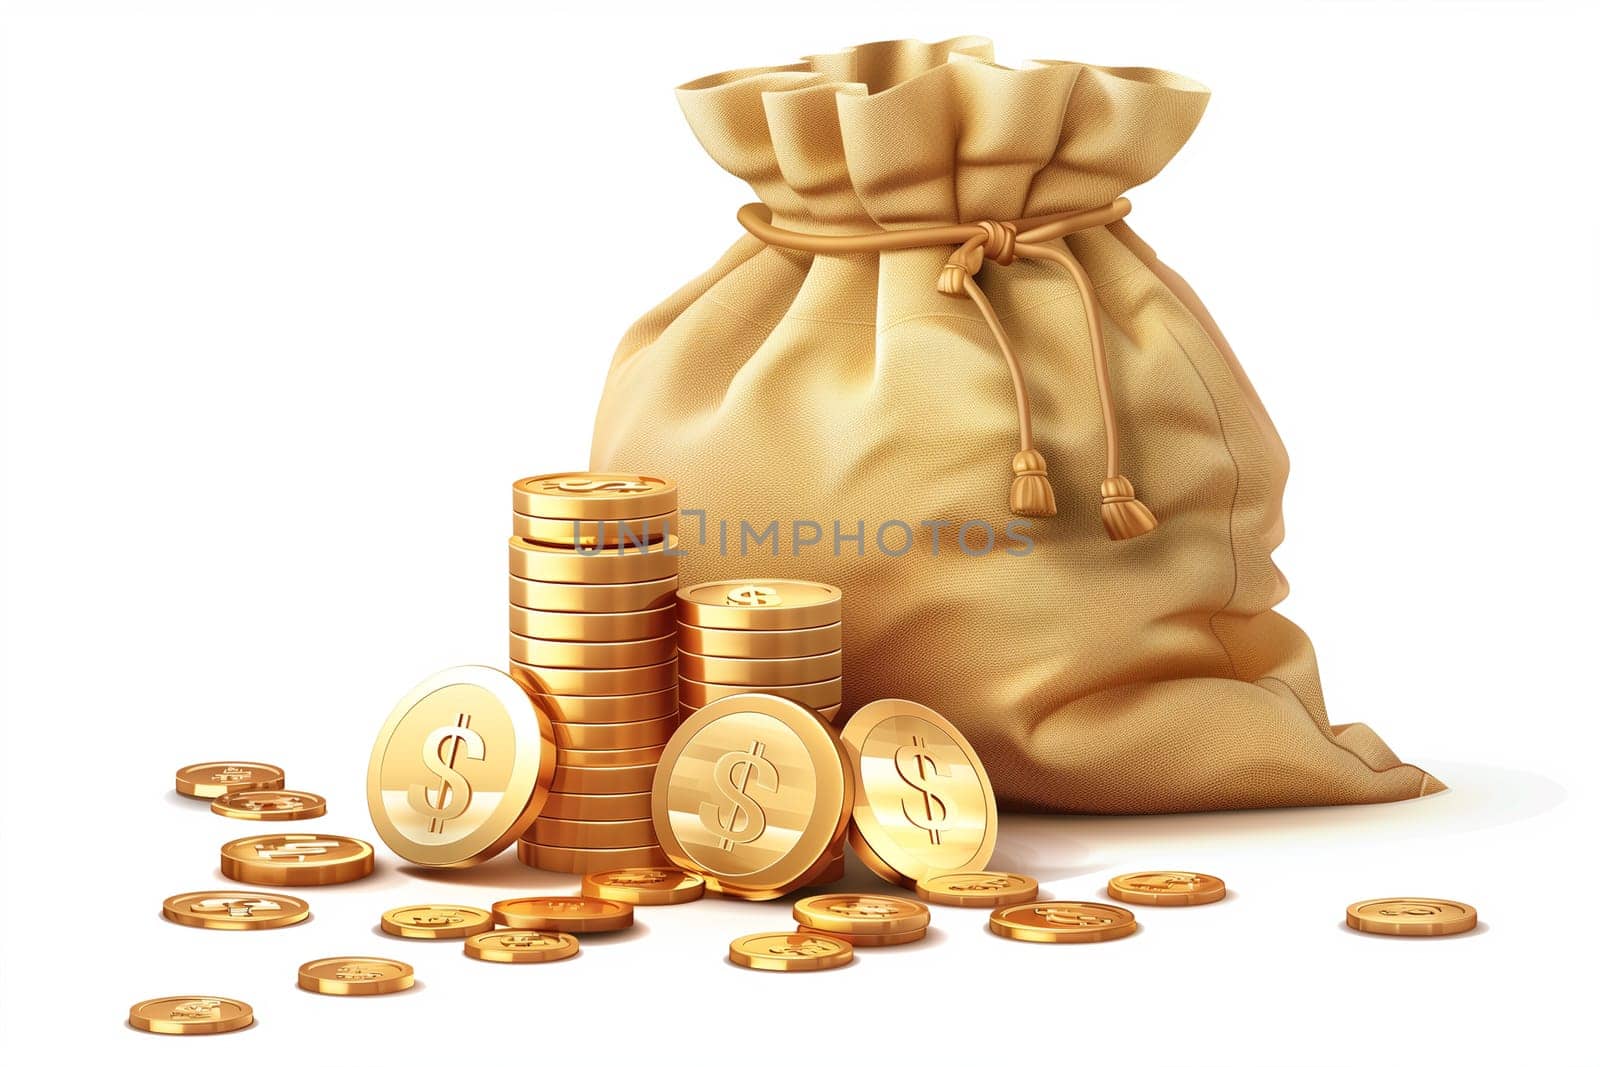 Gold Coins in a Sack Bag on a White Background by Sd28DimoN_1976